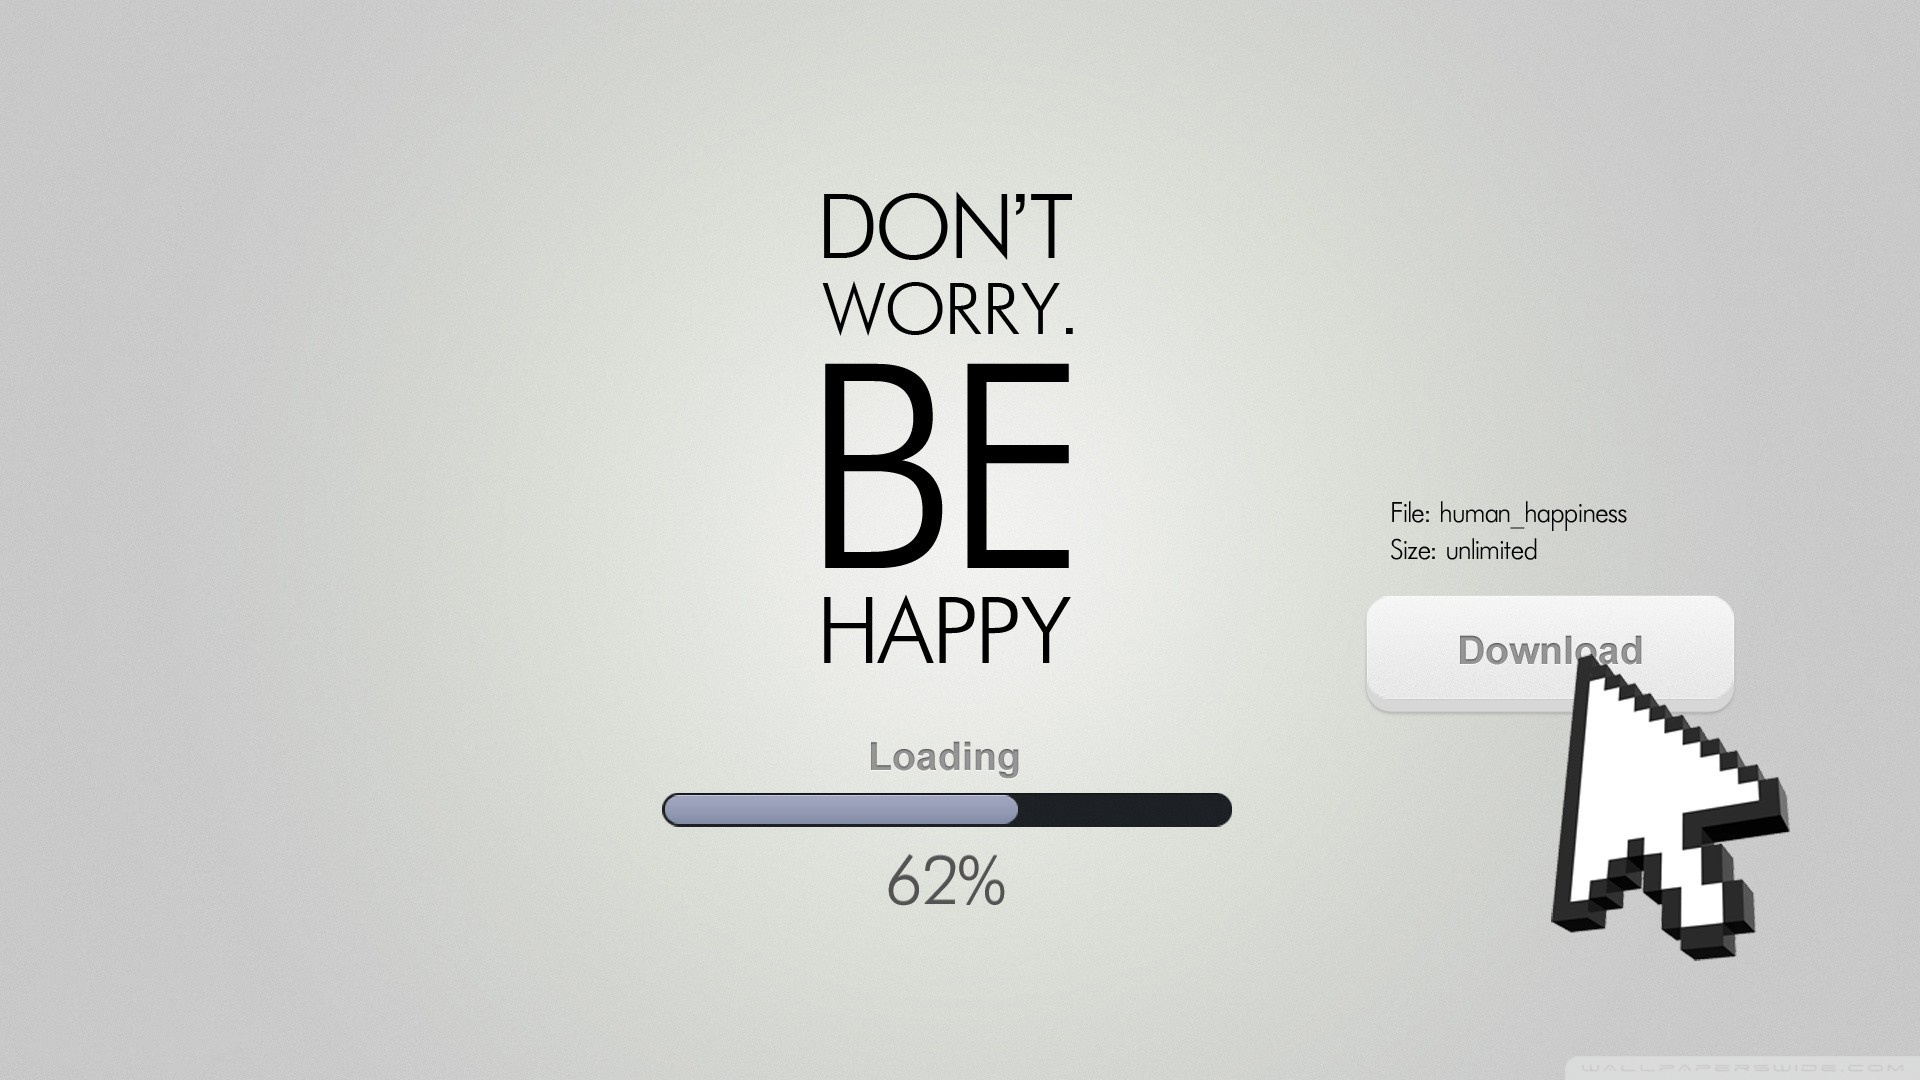 wallpaperswide.com_dont_worry_be_happy_2-wallpaper-1920x1080.jpg